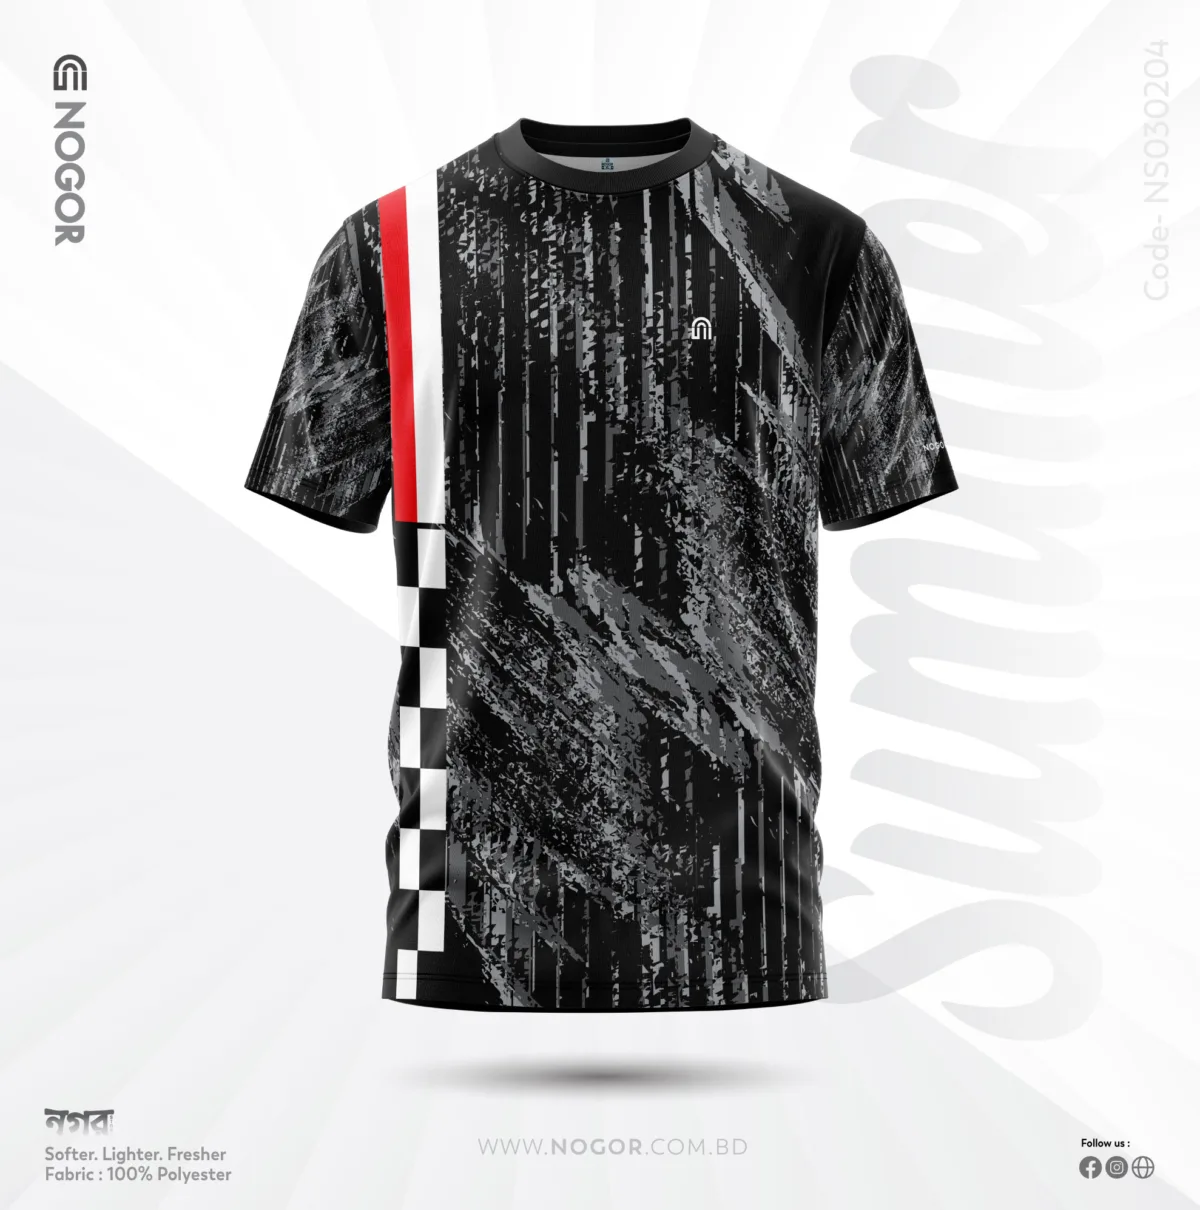 Summer Special Play Quality Half Sleeve Jersey by NOGOR